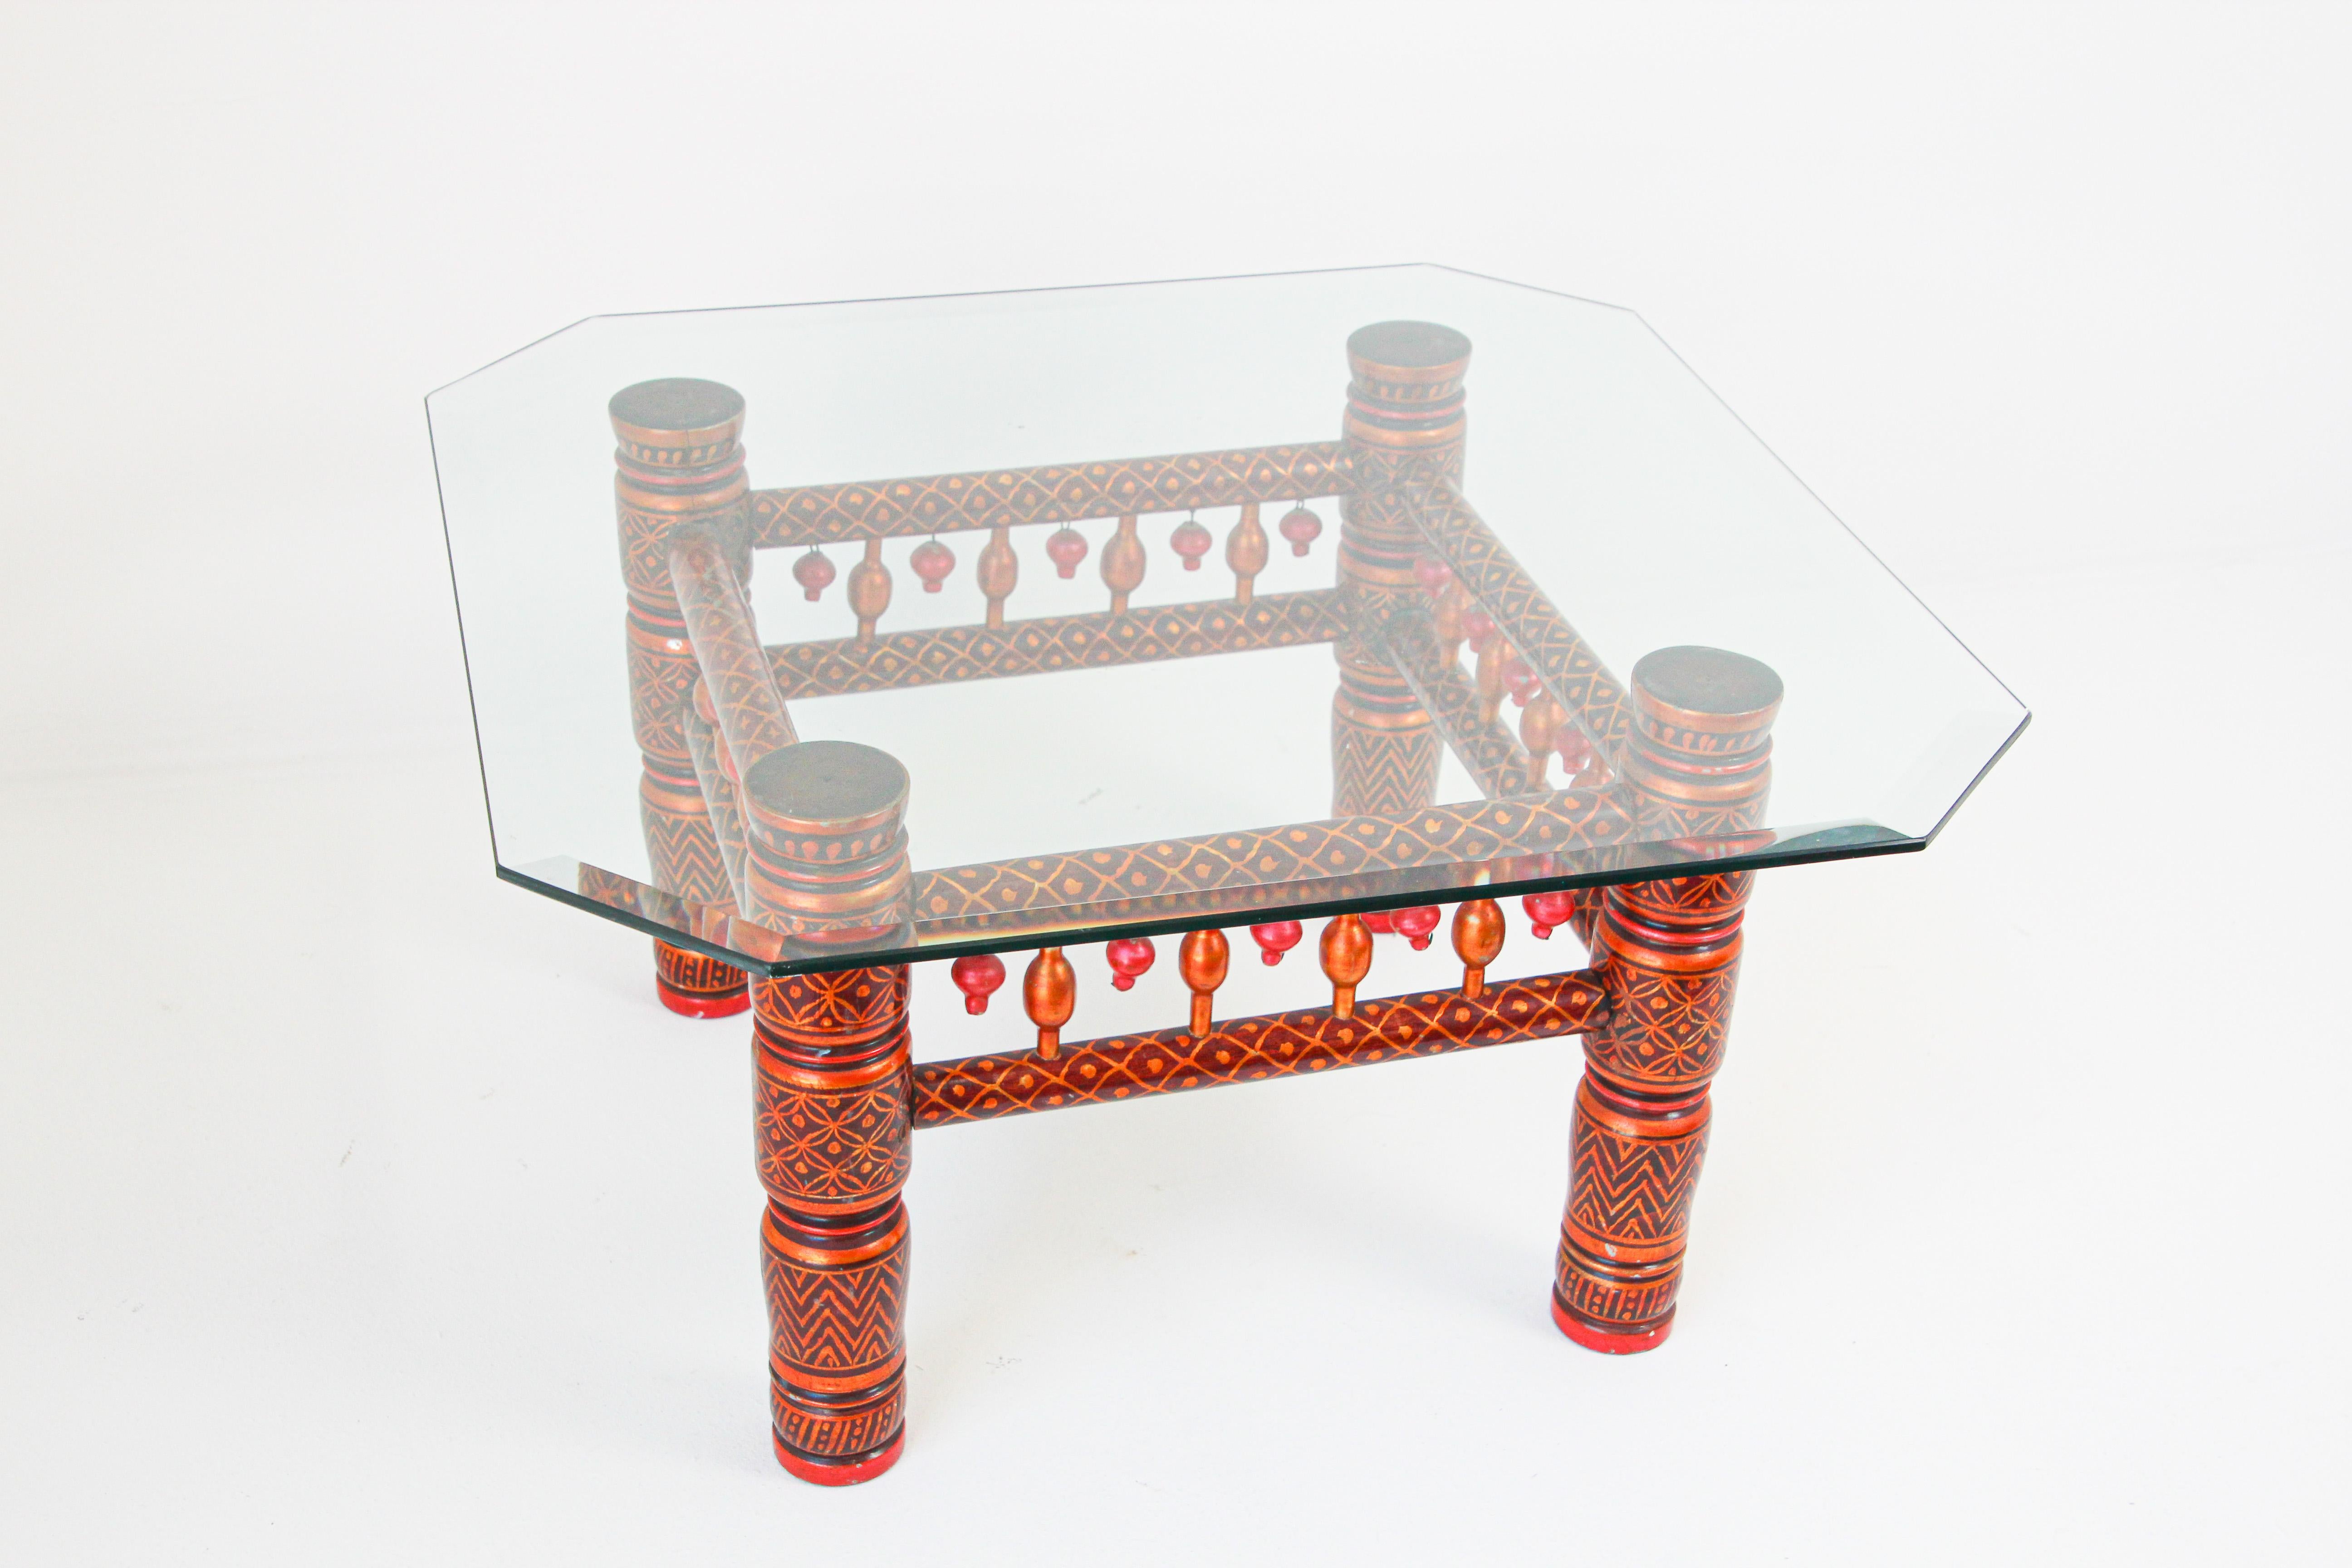 Rajasthani India low table with glass top
Rajasthani coffee or side table in red and gold colors, with small brass bells.
Great for your Moroccan room.
Vintage midcentury boho chic side table handcrafted in India.